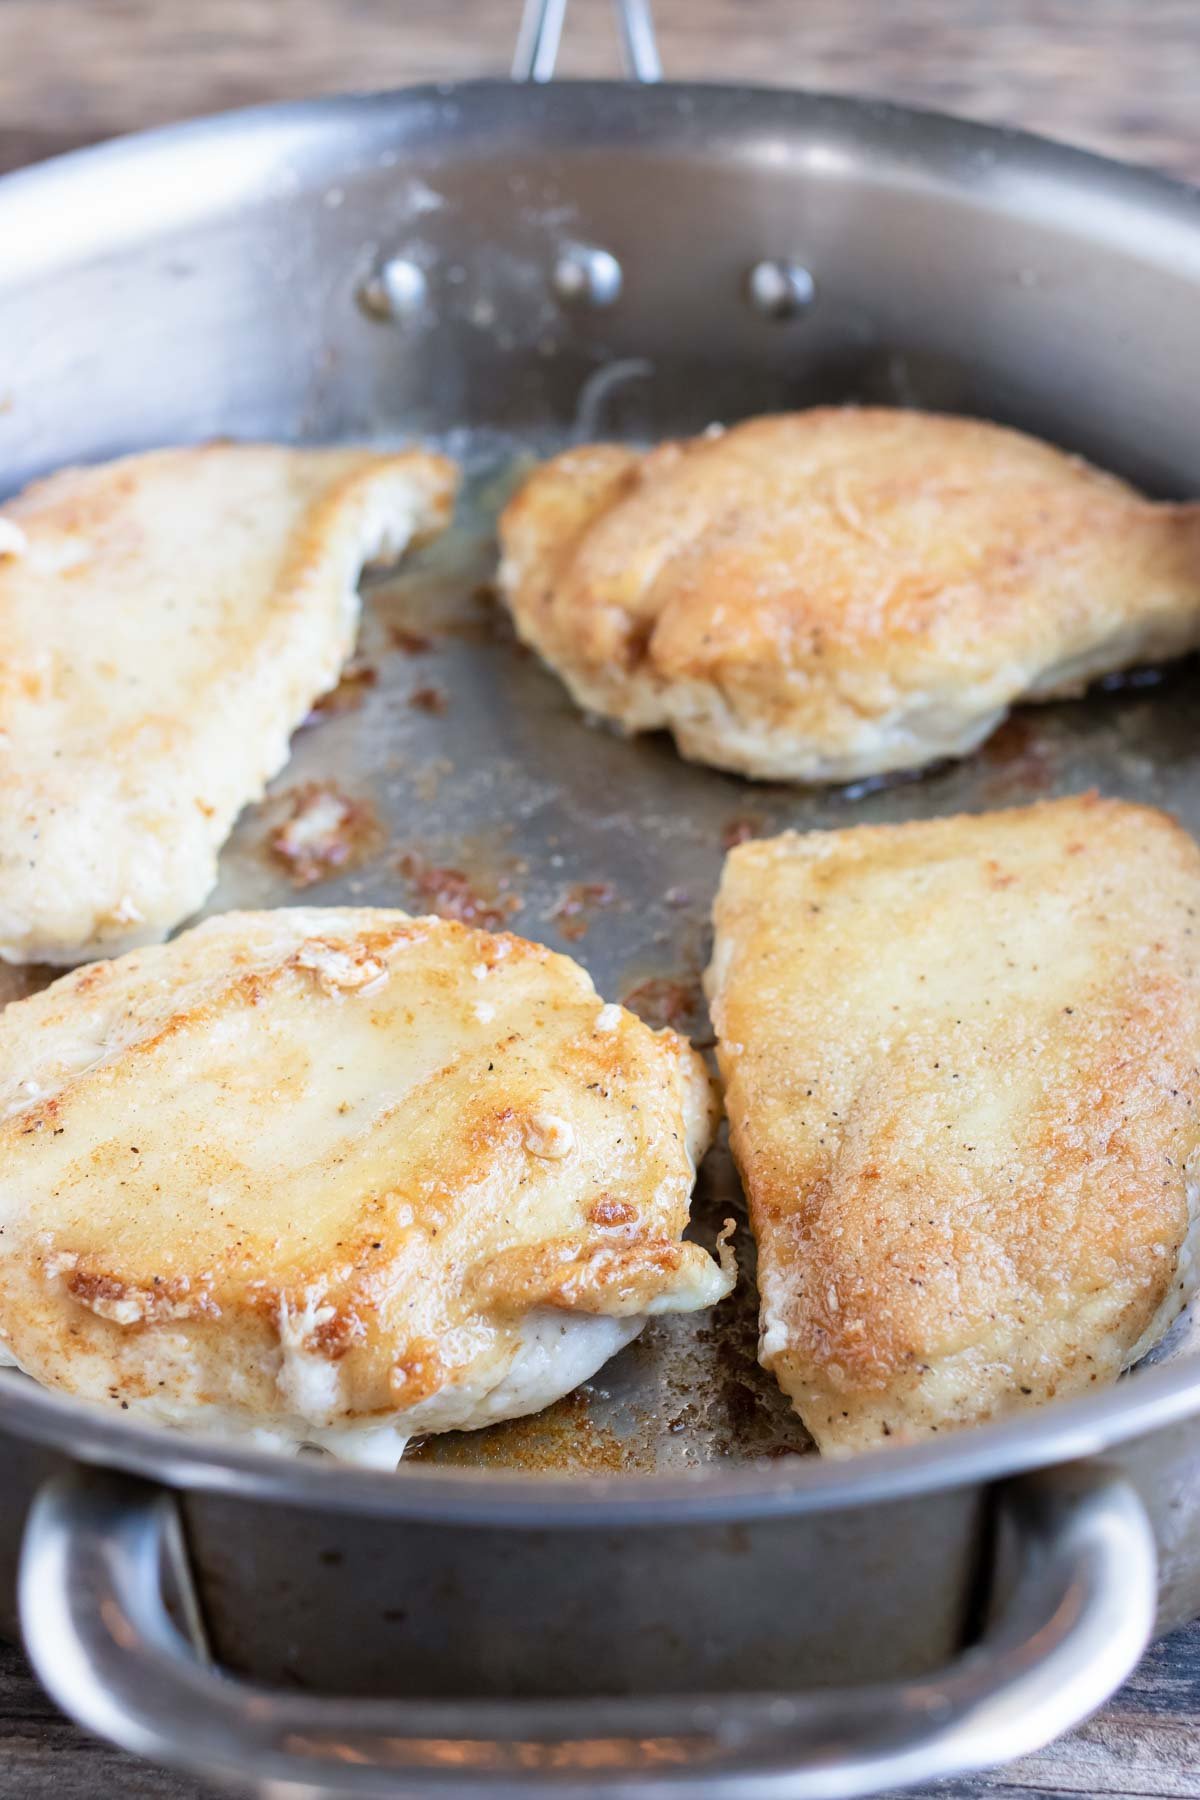 Chicken breasts are flipped during cooking.